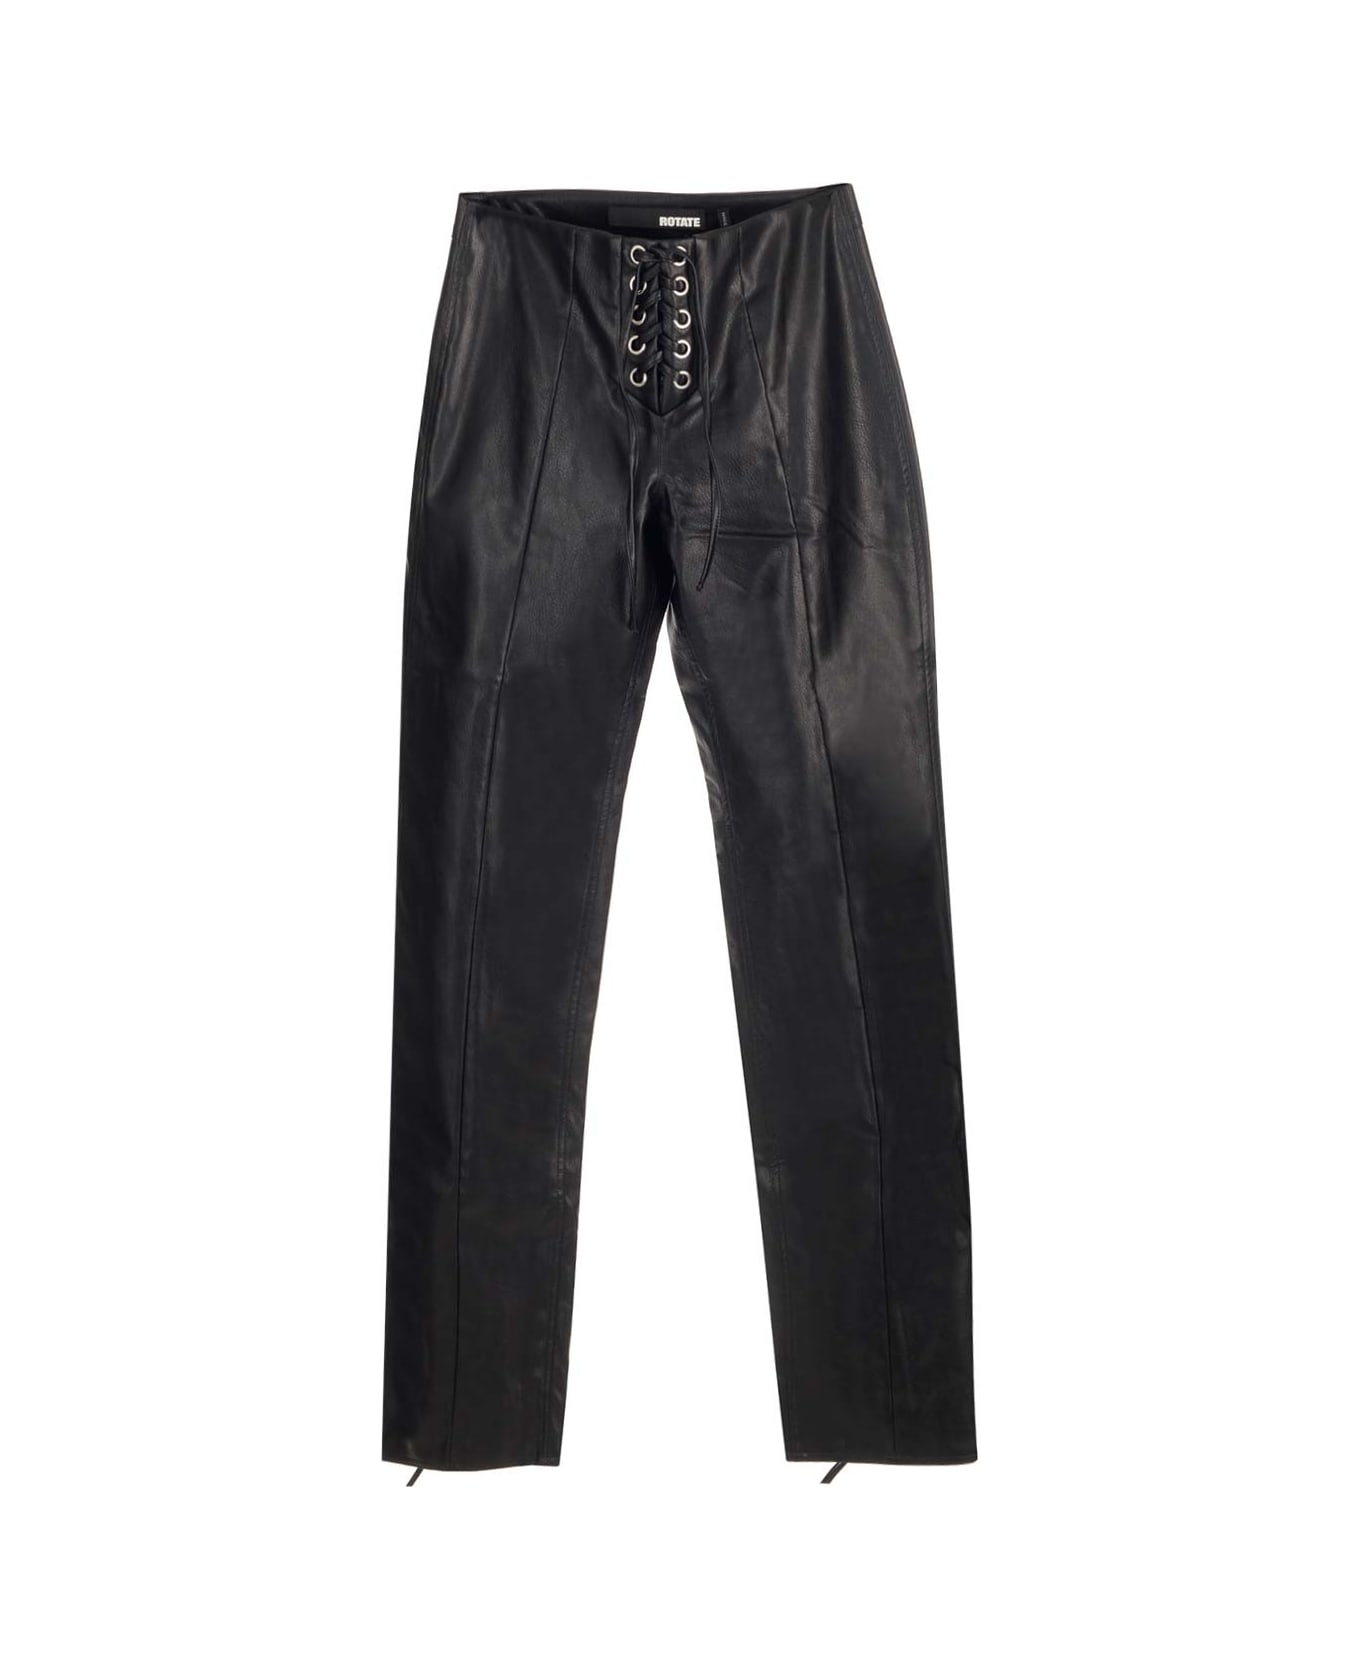 Rotate by Birger Christensen Leather Trousers - Black